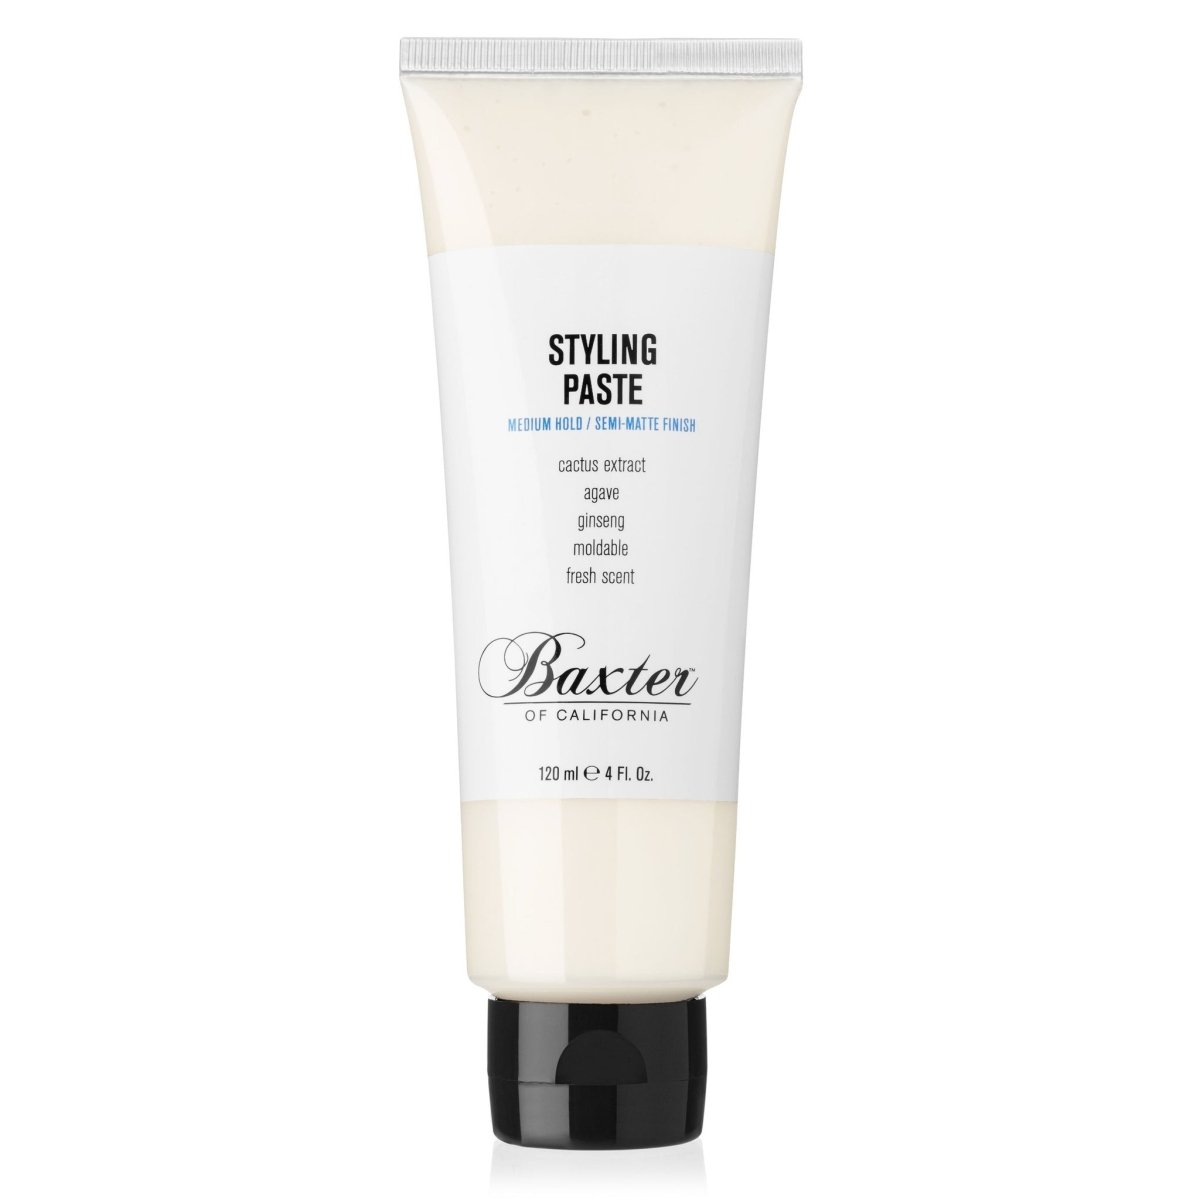 Baxter of California Styling Paste - SkincareEssentials